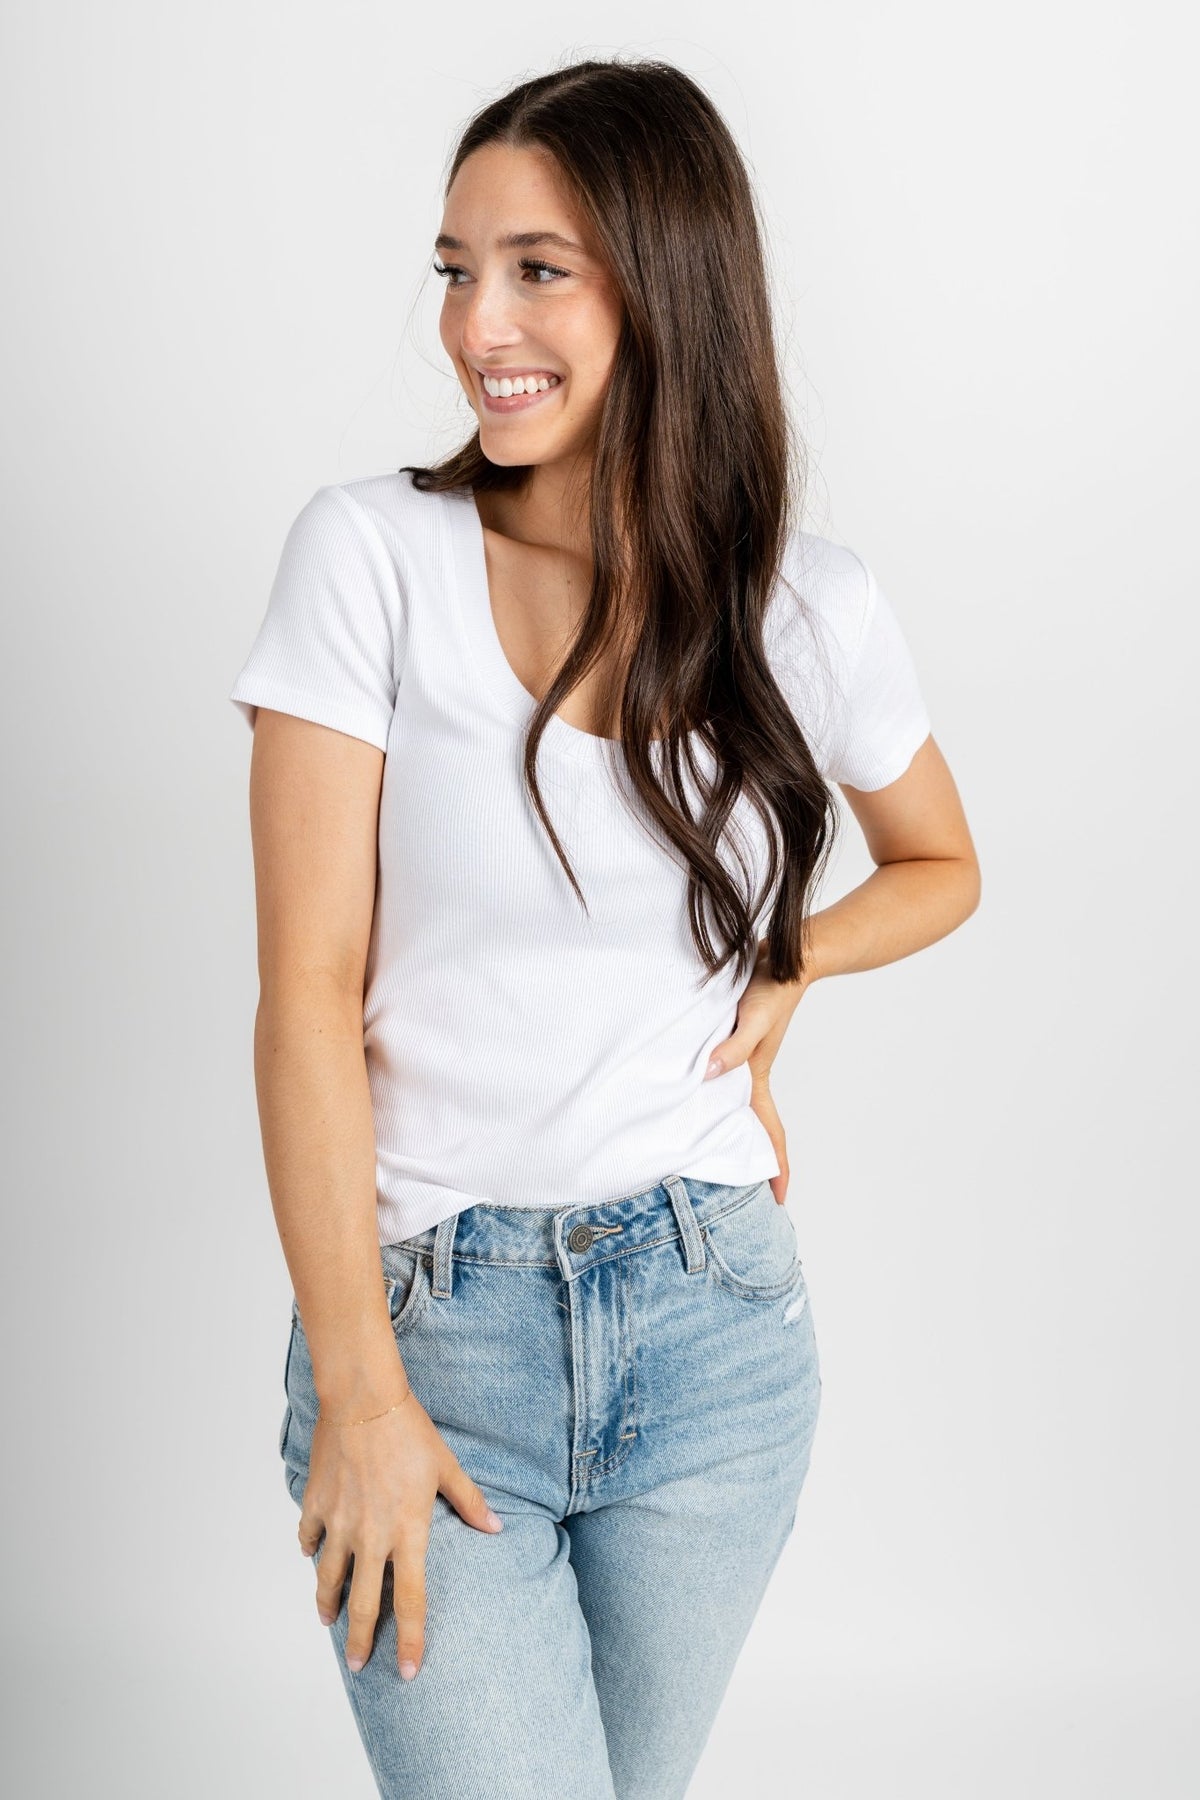 Z Supply Sirena short sleeve tee white - Z Supply Top - Z Supply Tops, Dresses, Tanks, Tees, Cardigans, Joggers and Loungewear at Lush Fashion Lounge